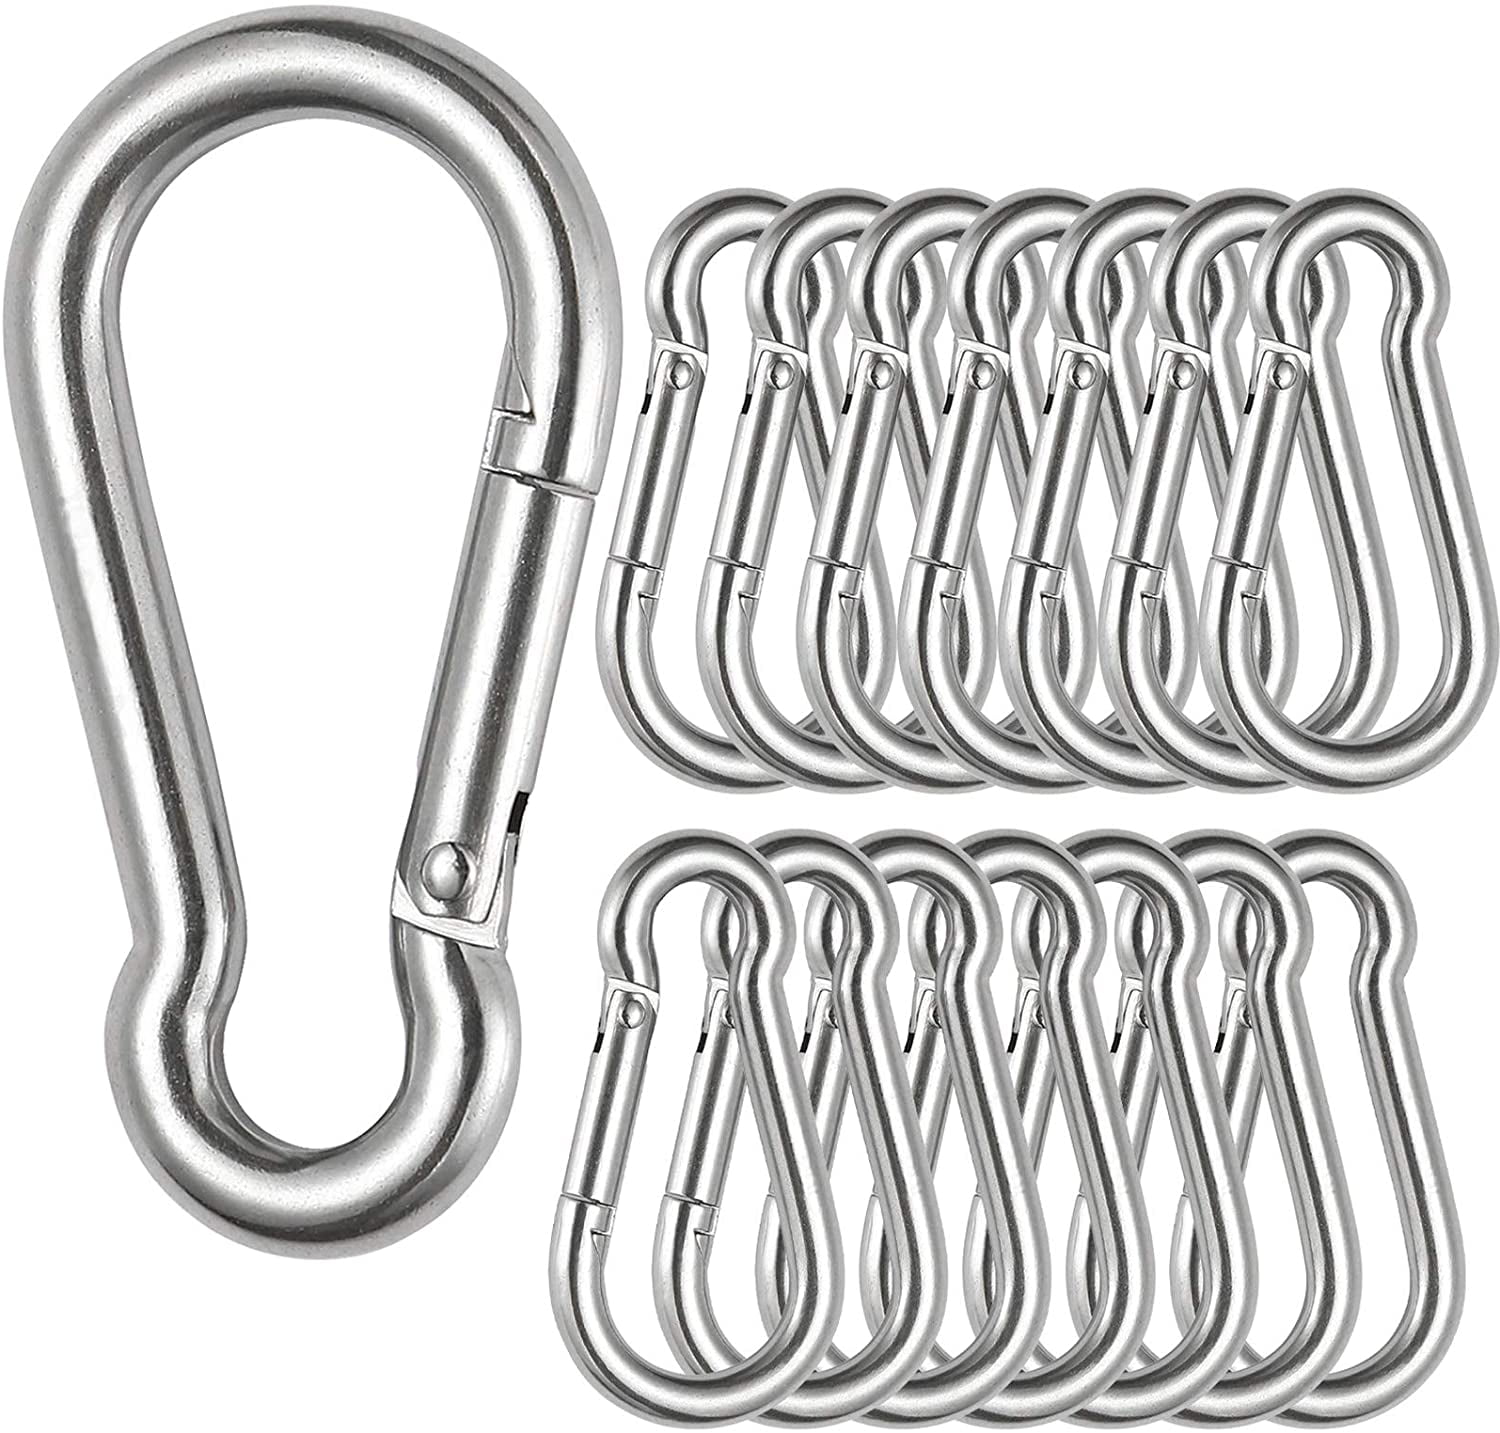 Large Stainless Steel Spring Snap Hook 4 Inch Carabiner Clips 2 Pack 400 lbs 